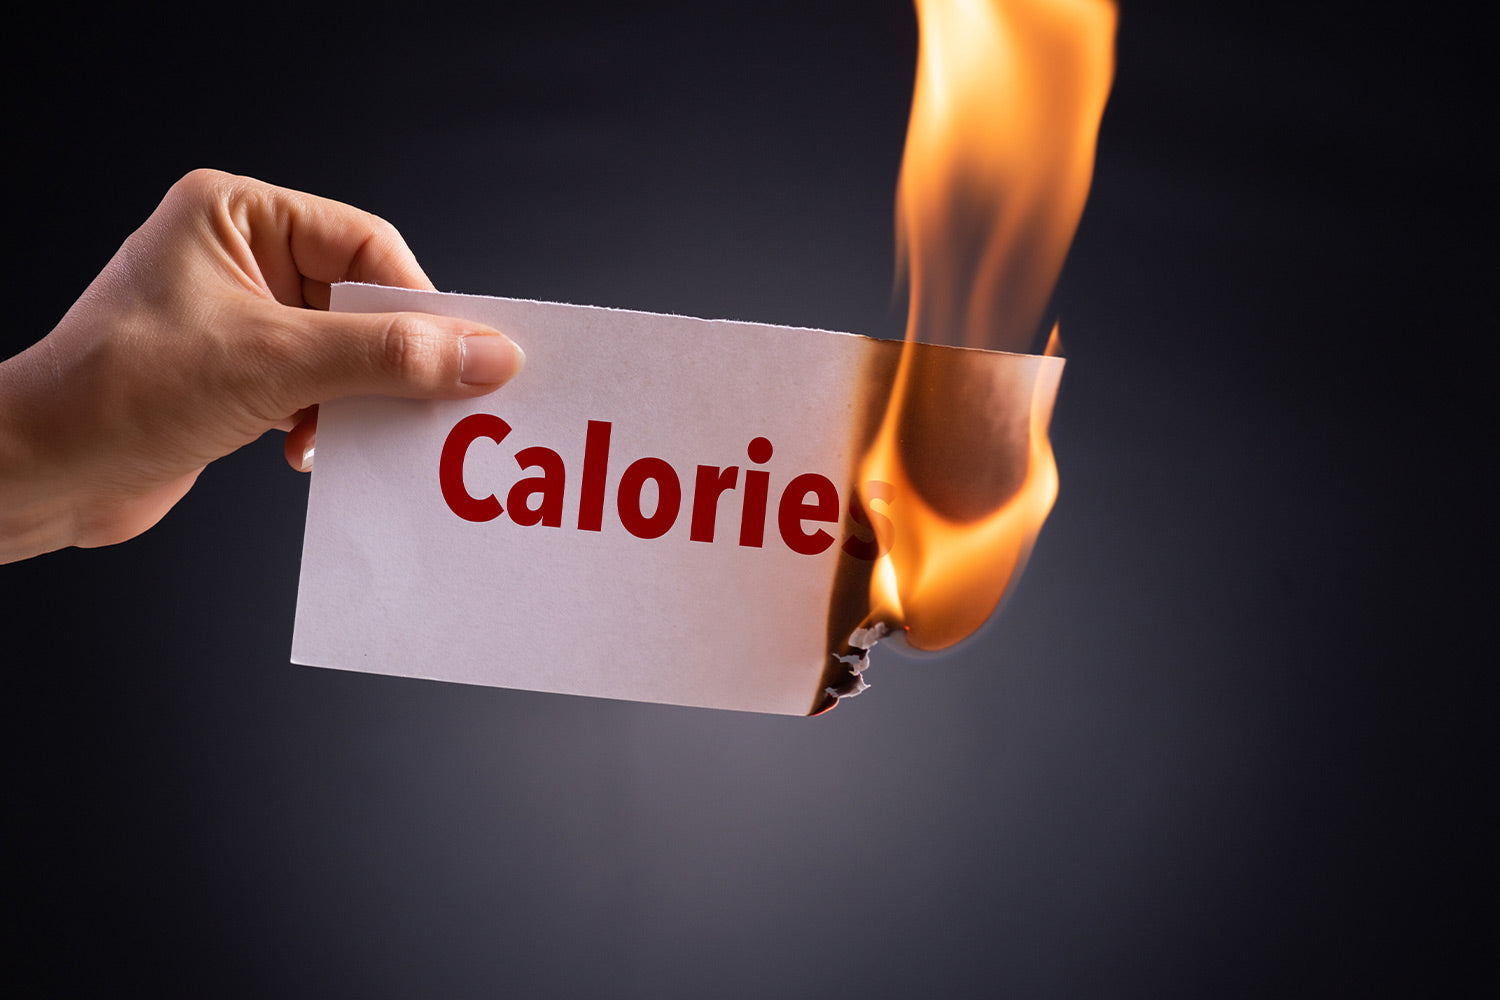 How Many Calories Should You Burn a Day?